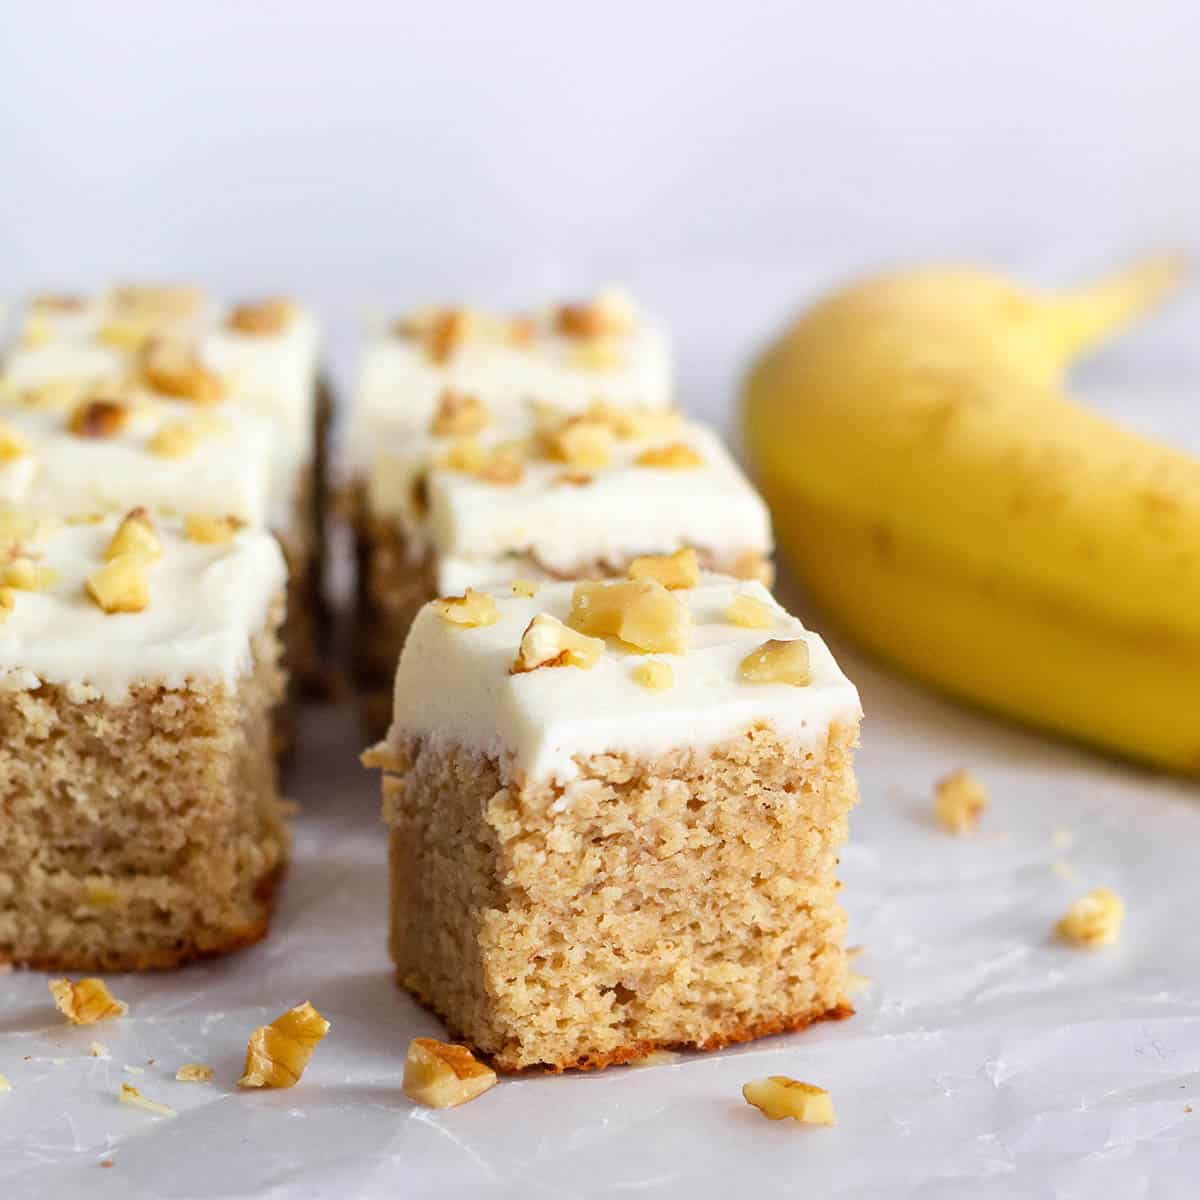 square pieces of frosted banana walnut cake with a ripe banana on the right and pieces of walnuts surround the cake pieces